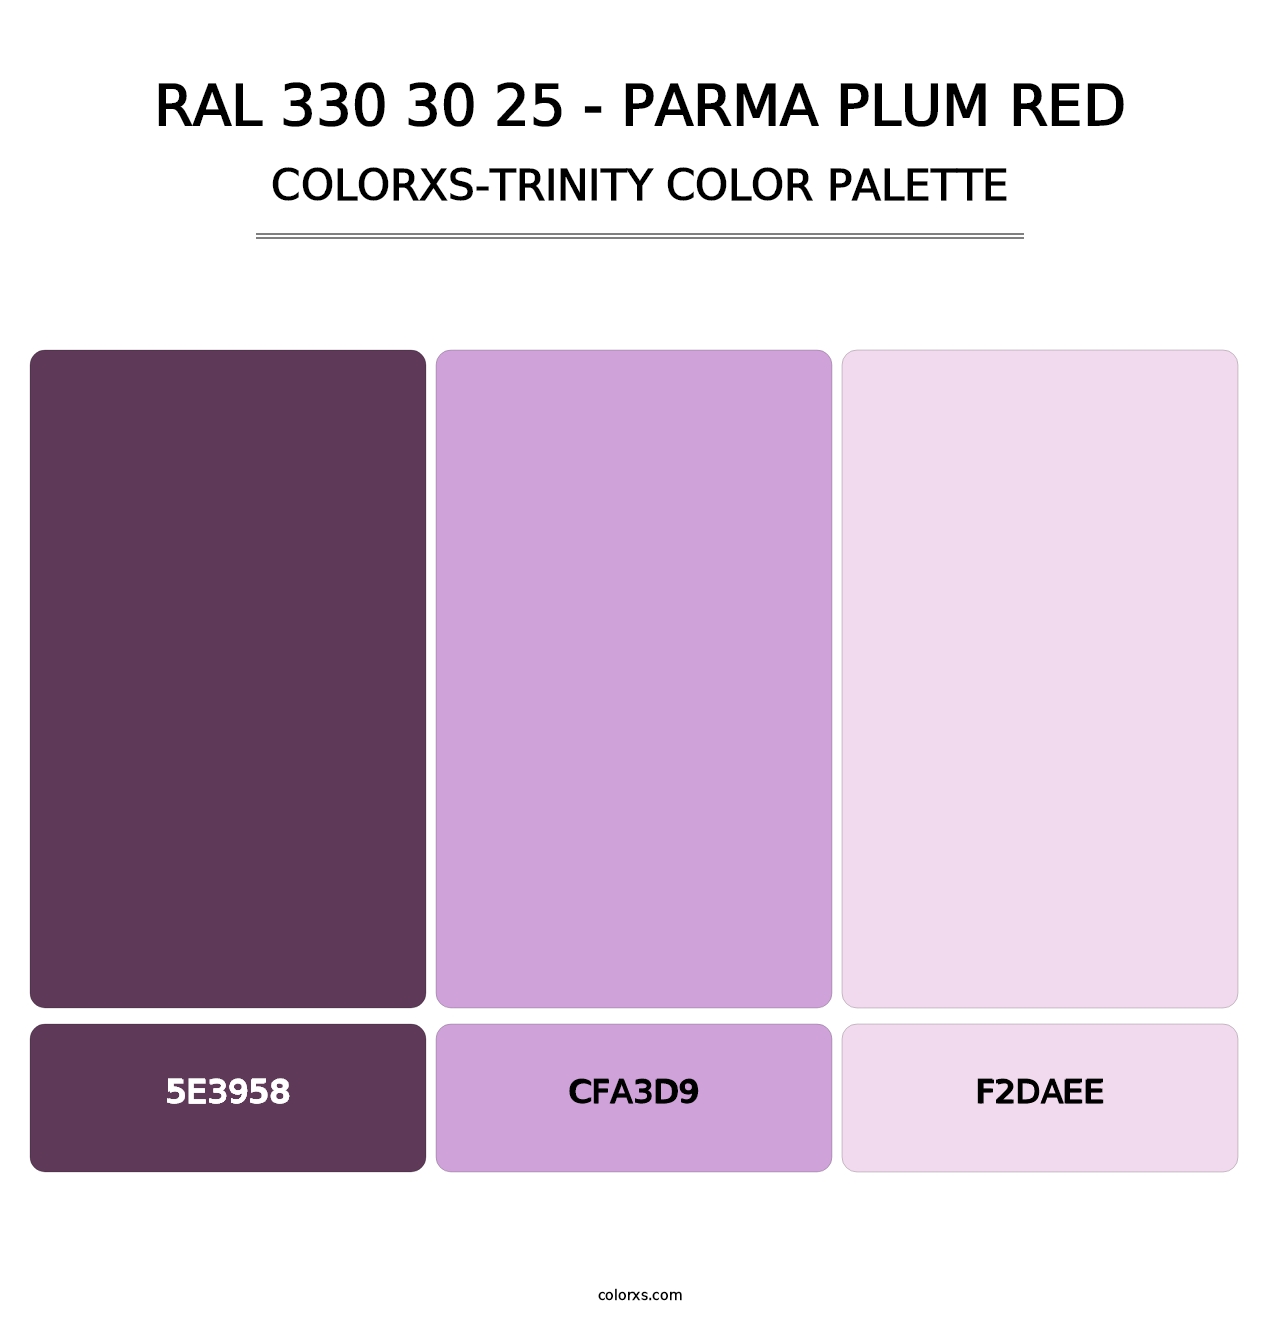 RAL 330 30 25 - Parma Plum Red - Colorxs Trinity Palette